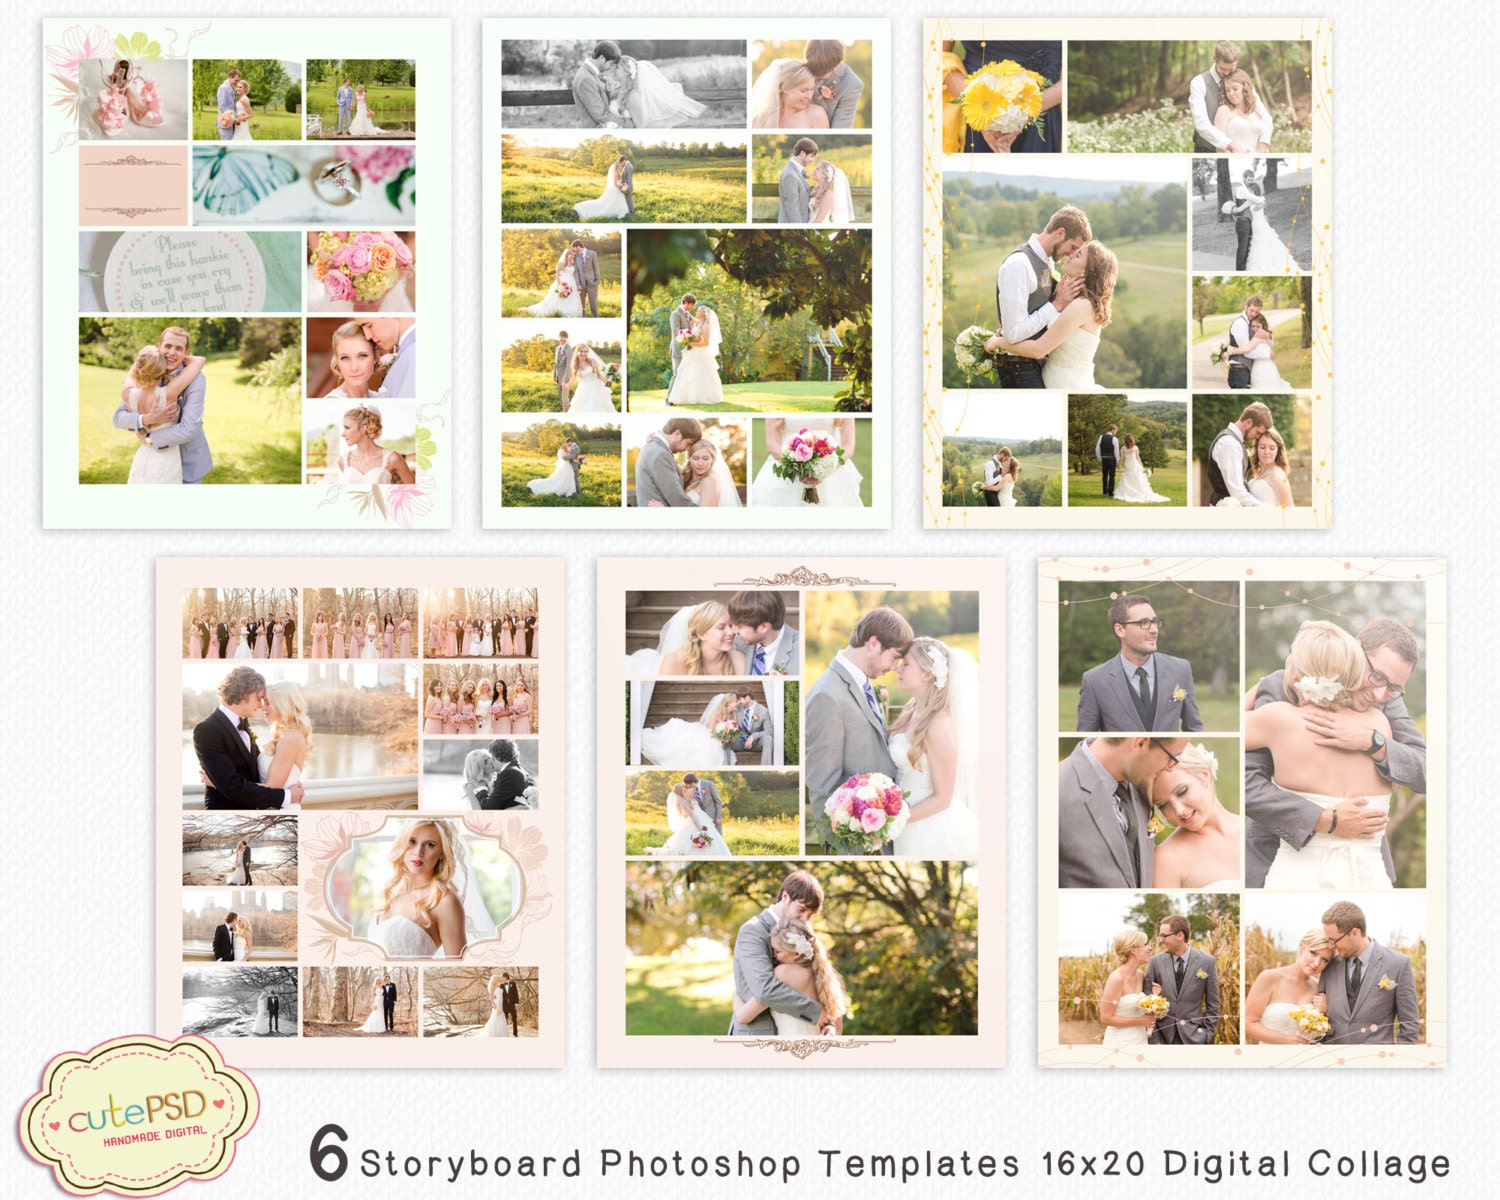 6 Storyboard Photoshop Templates 16x20 Digital Collage By Cutepsd